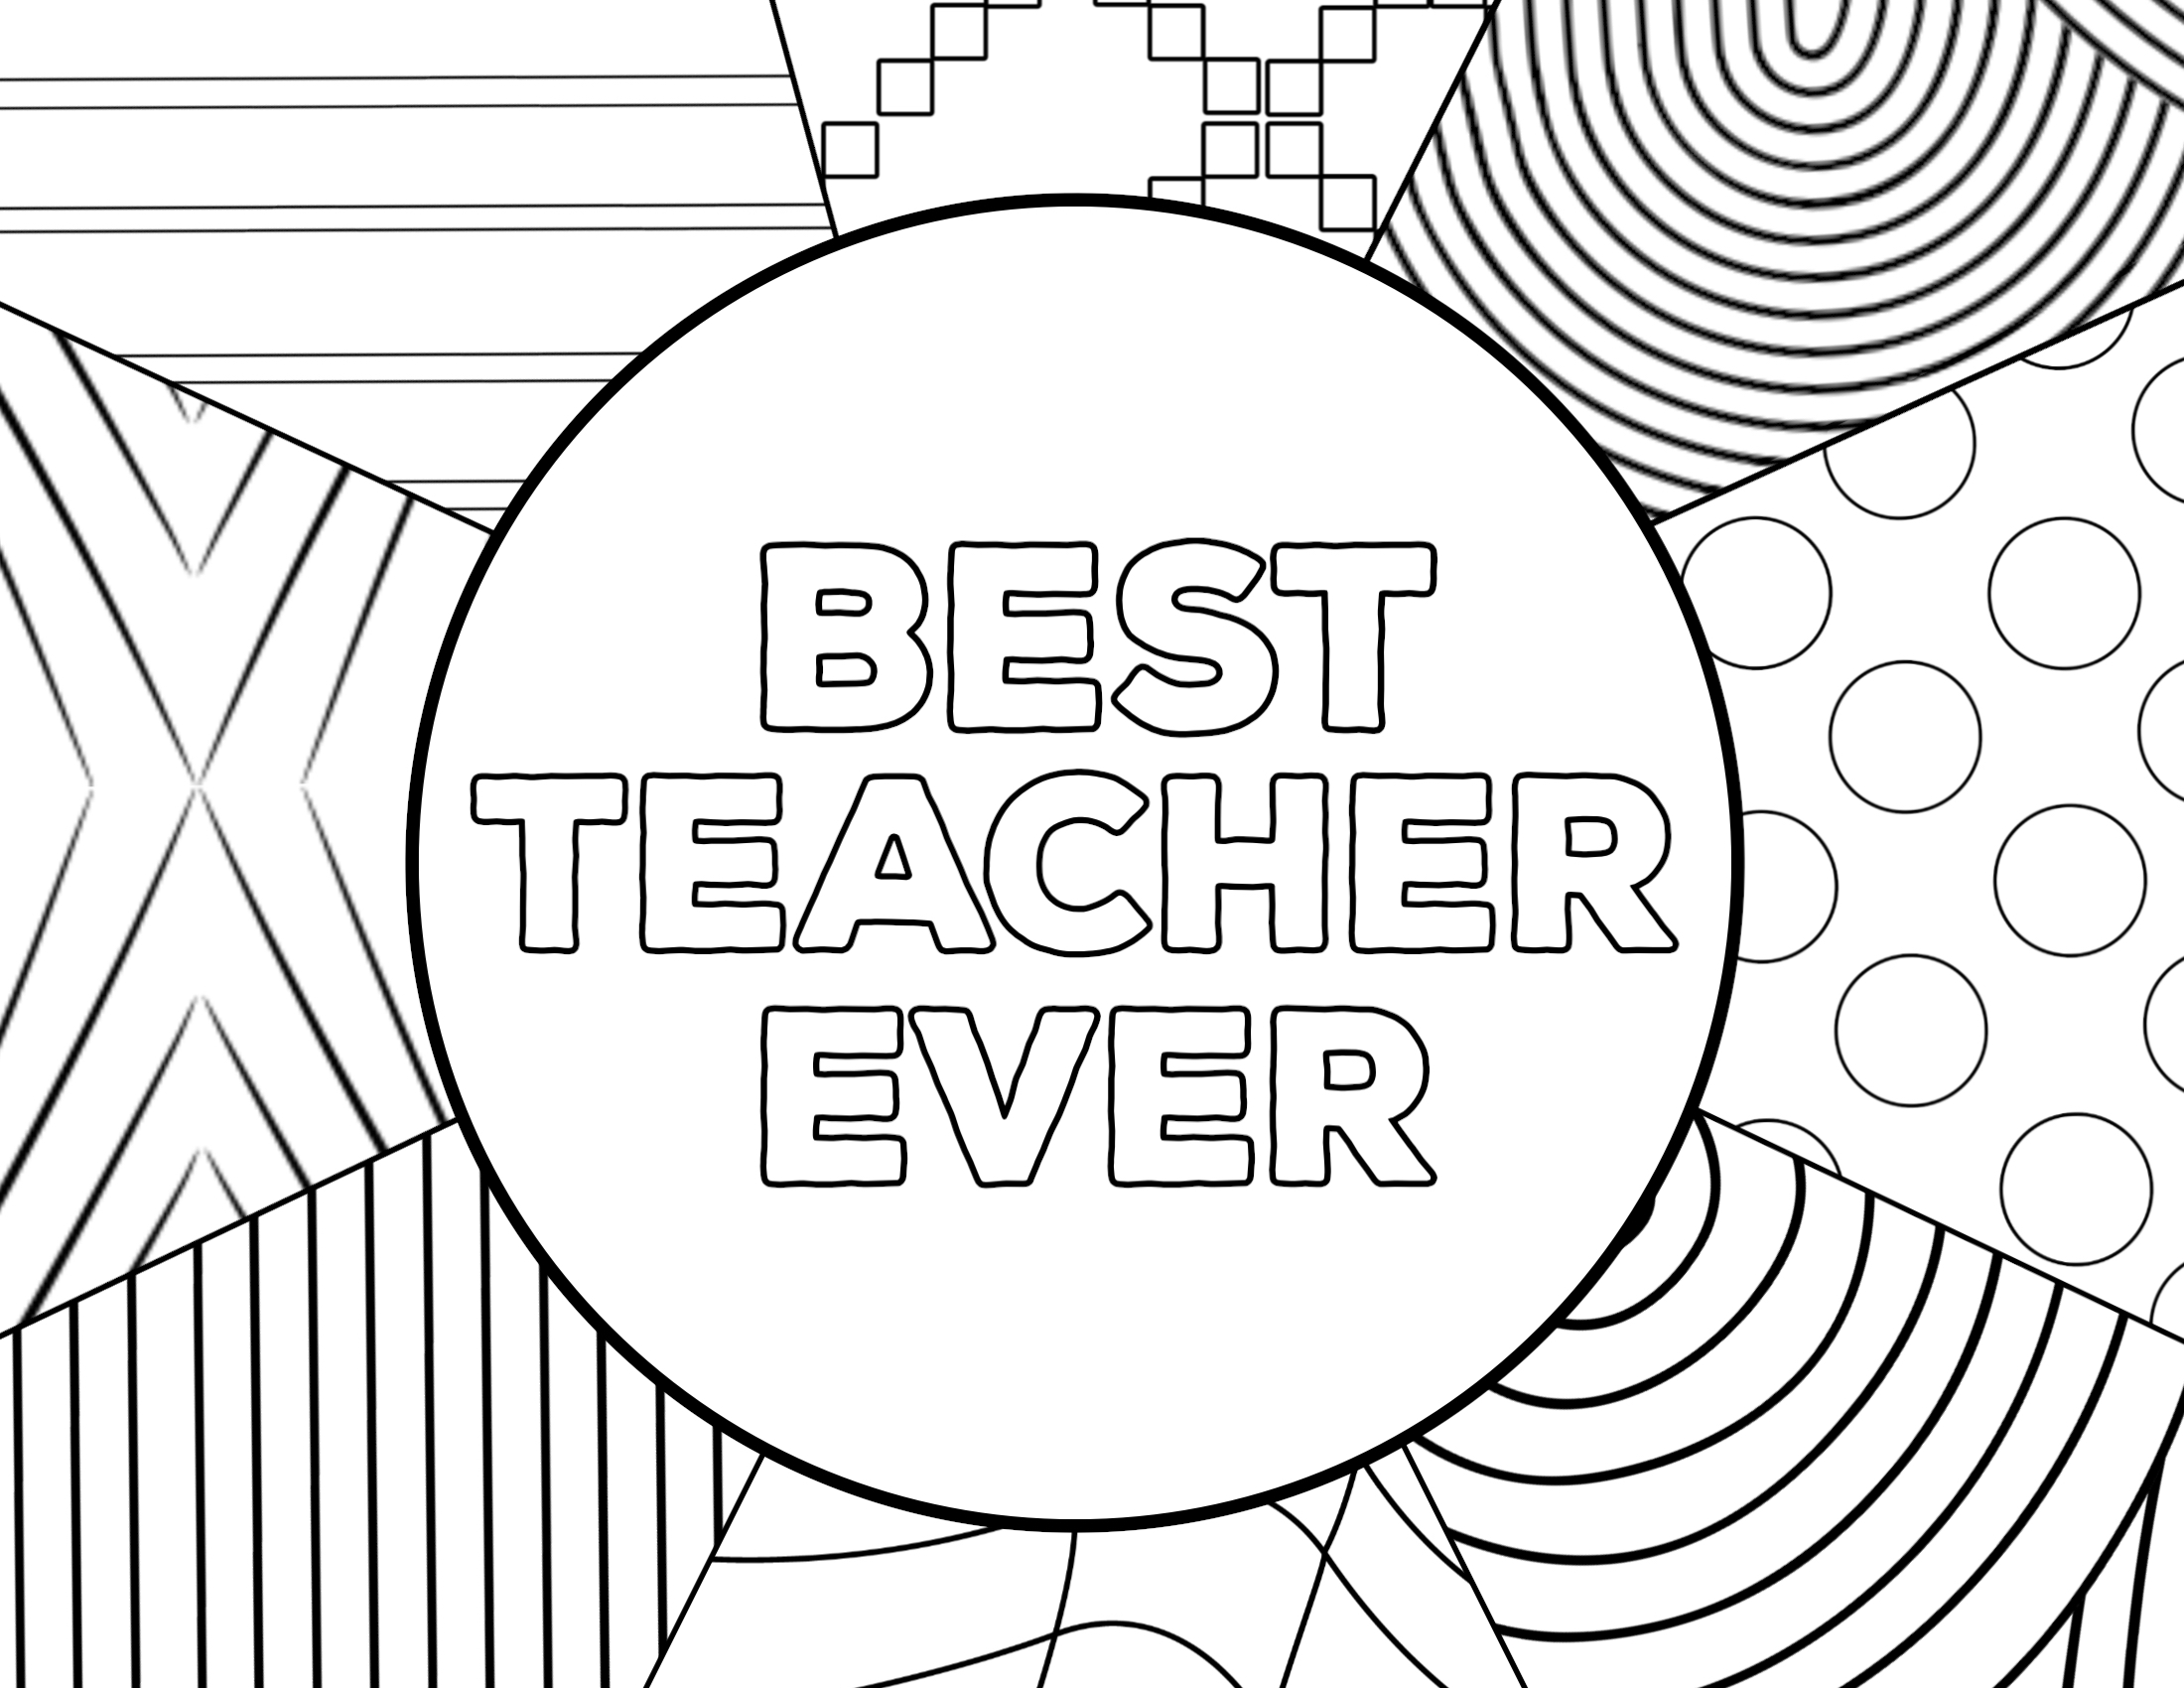 thank-you-teacher-coloring-pages-at-getcolorings-free-printable